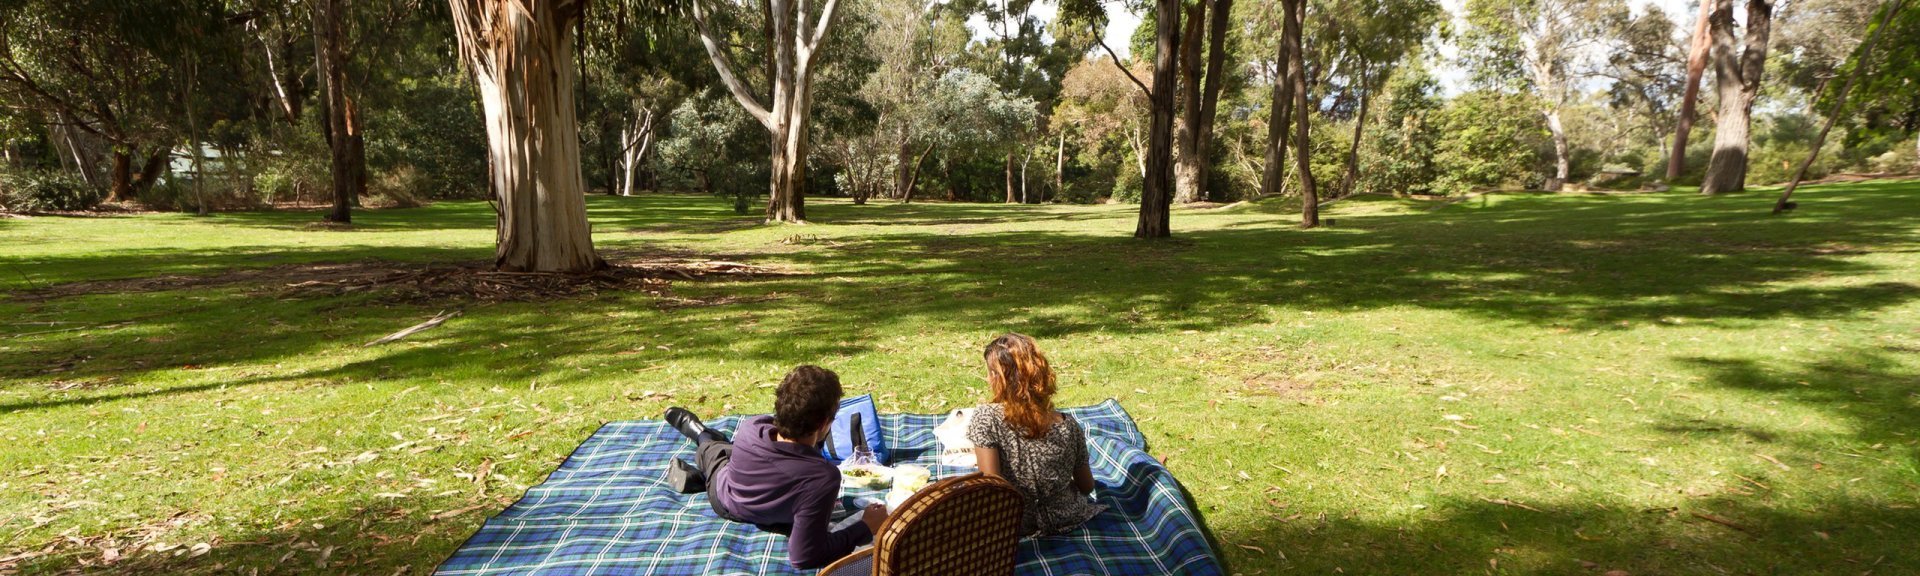 A picnic on the Eucalypt Lawn